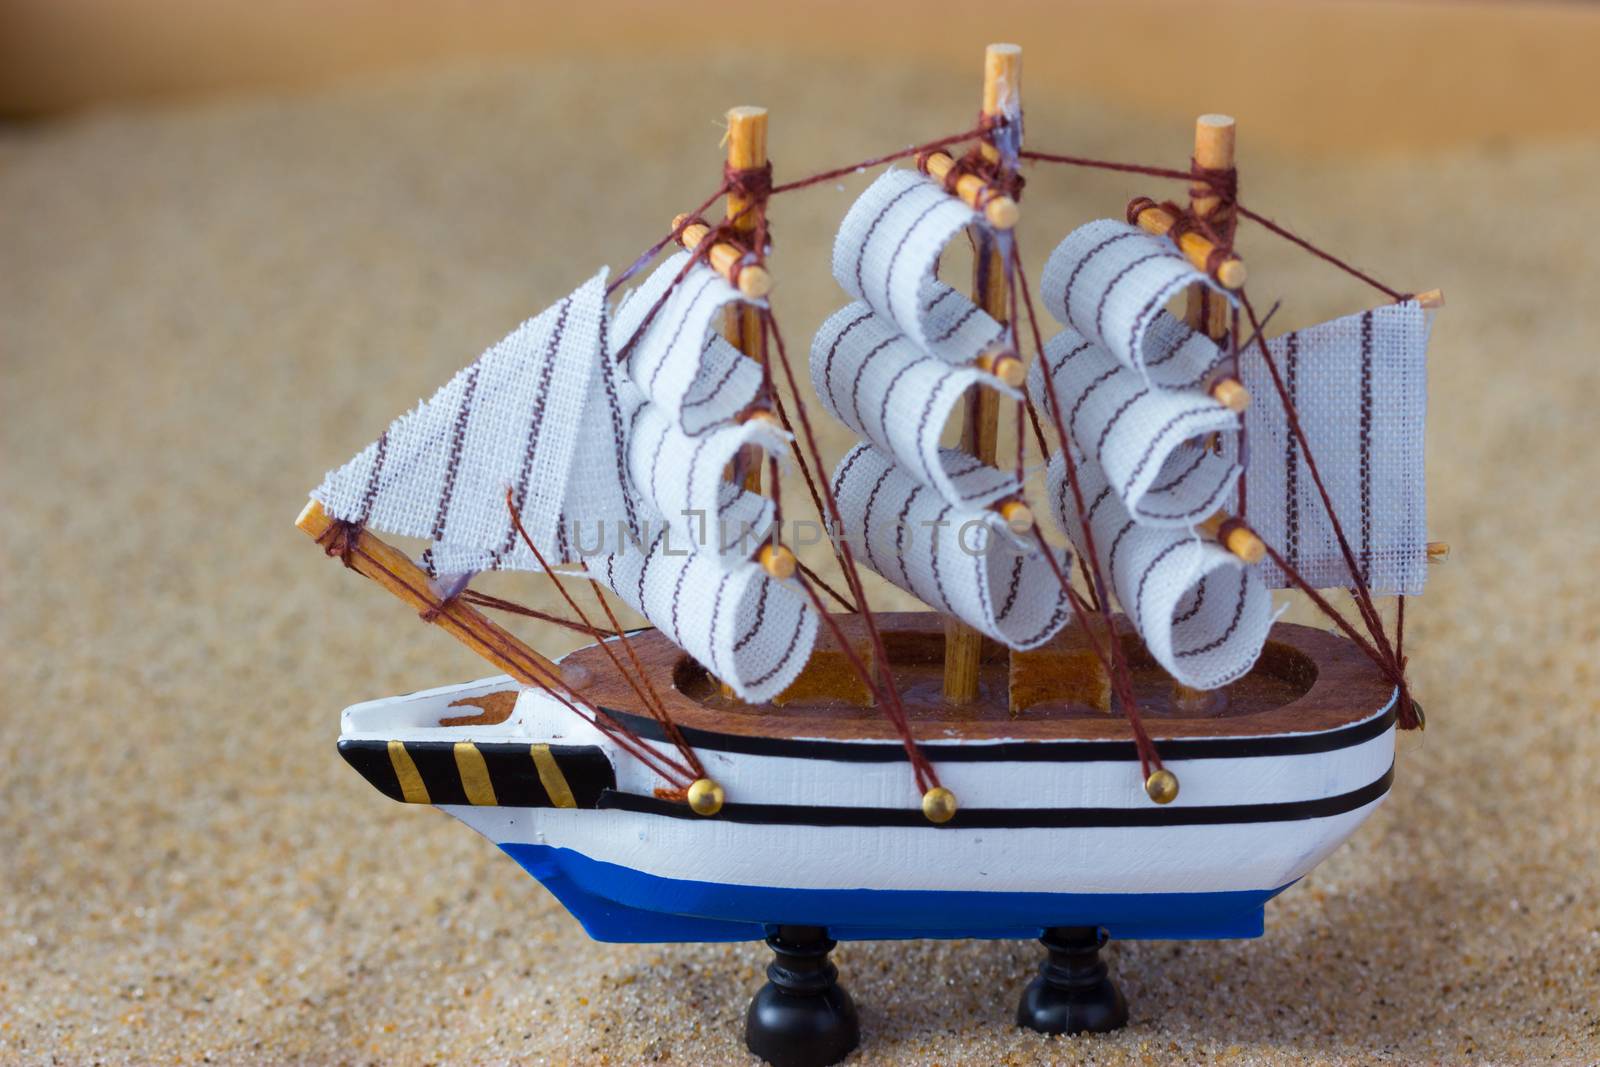 toy of a sailing ship by liwei12